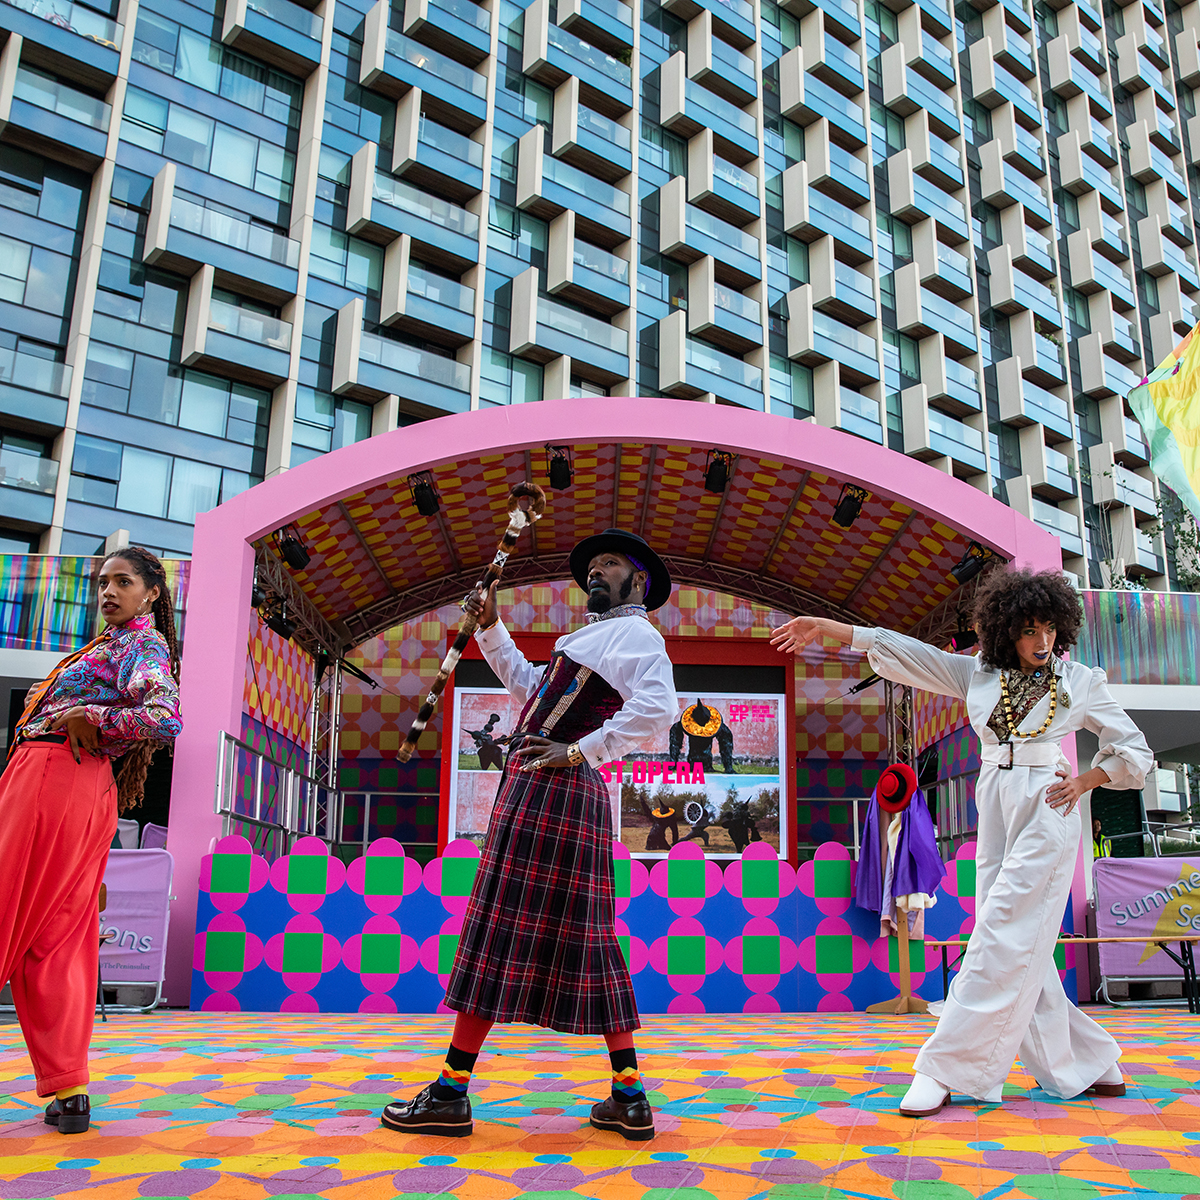 A photo of Patrick Ziza performing 'Dance by Design'. Four performers in Dandy clothing perform on stage. They are dressed in colourful shirts, hats and suit trousers, pulling suave poses.